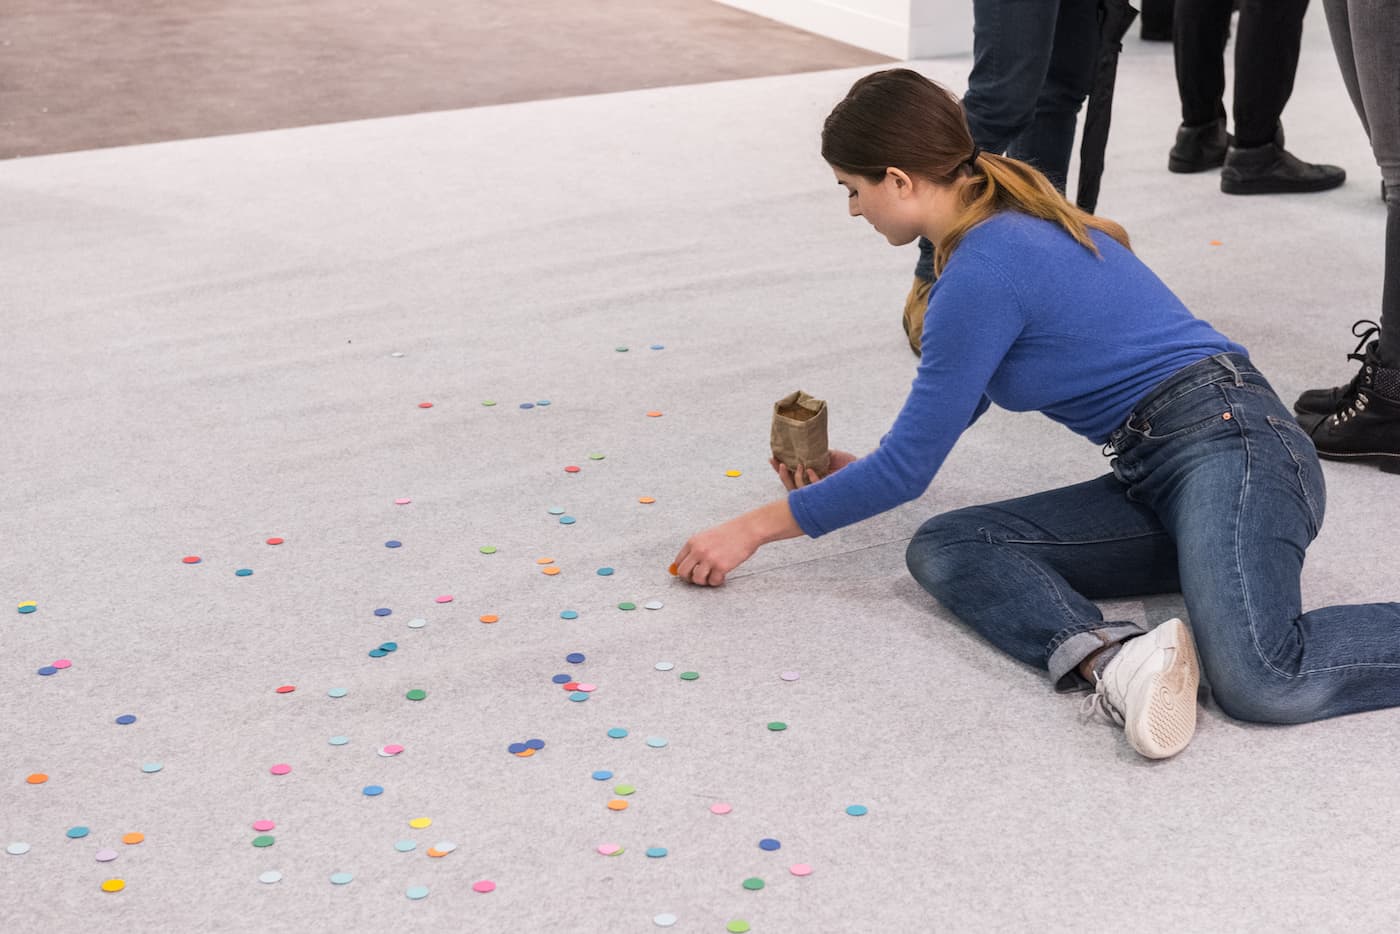 A performer sitting on the floor arranging pieces of confetti